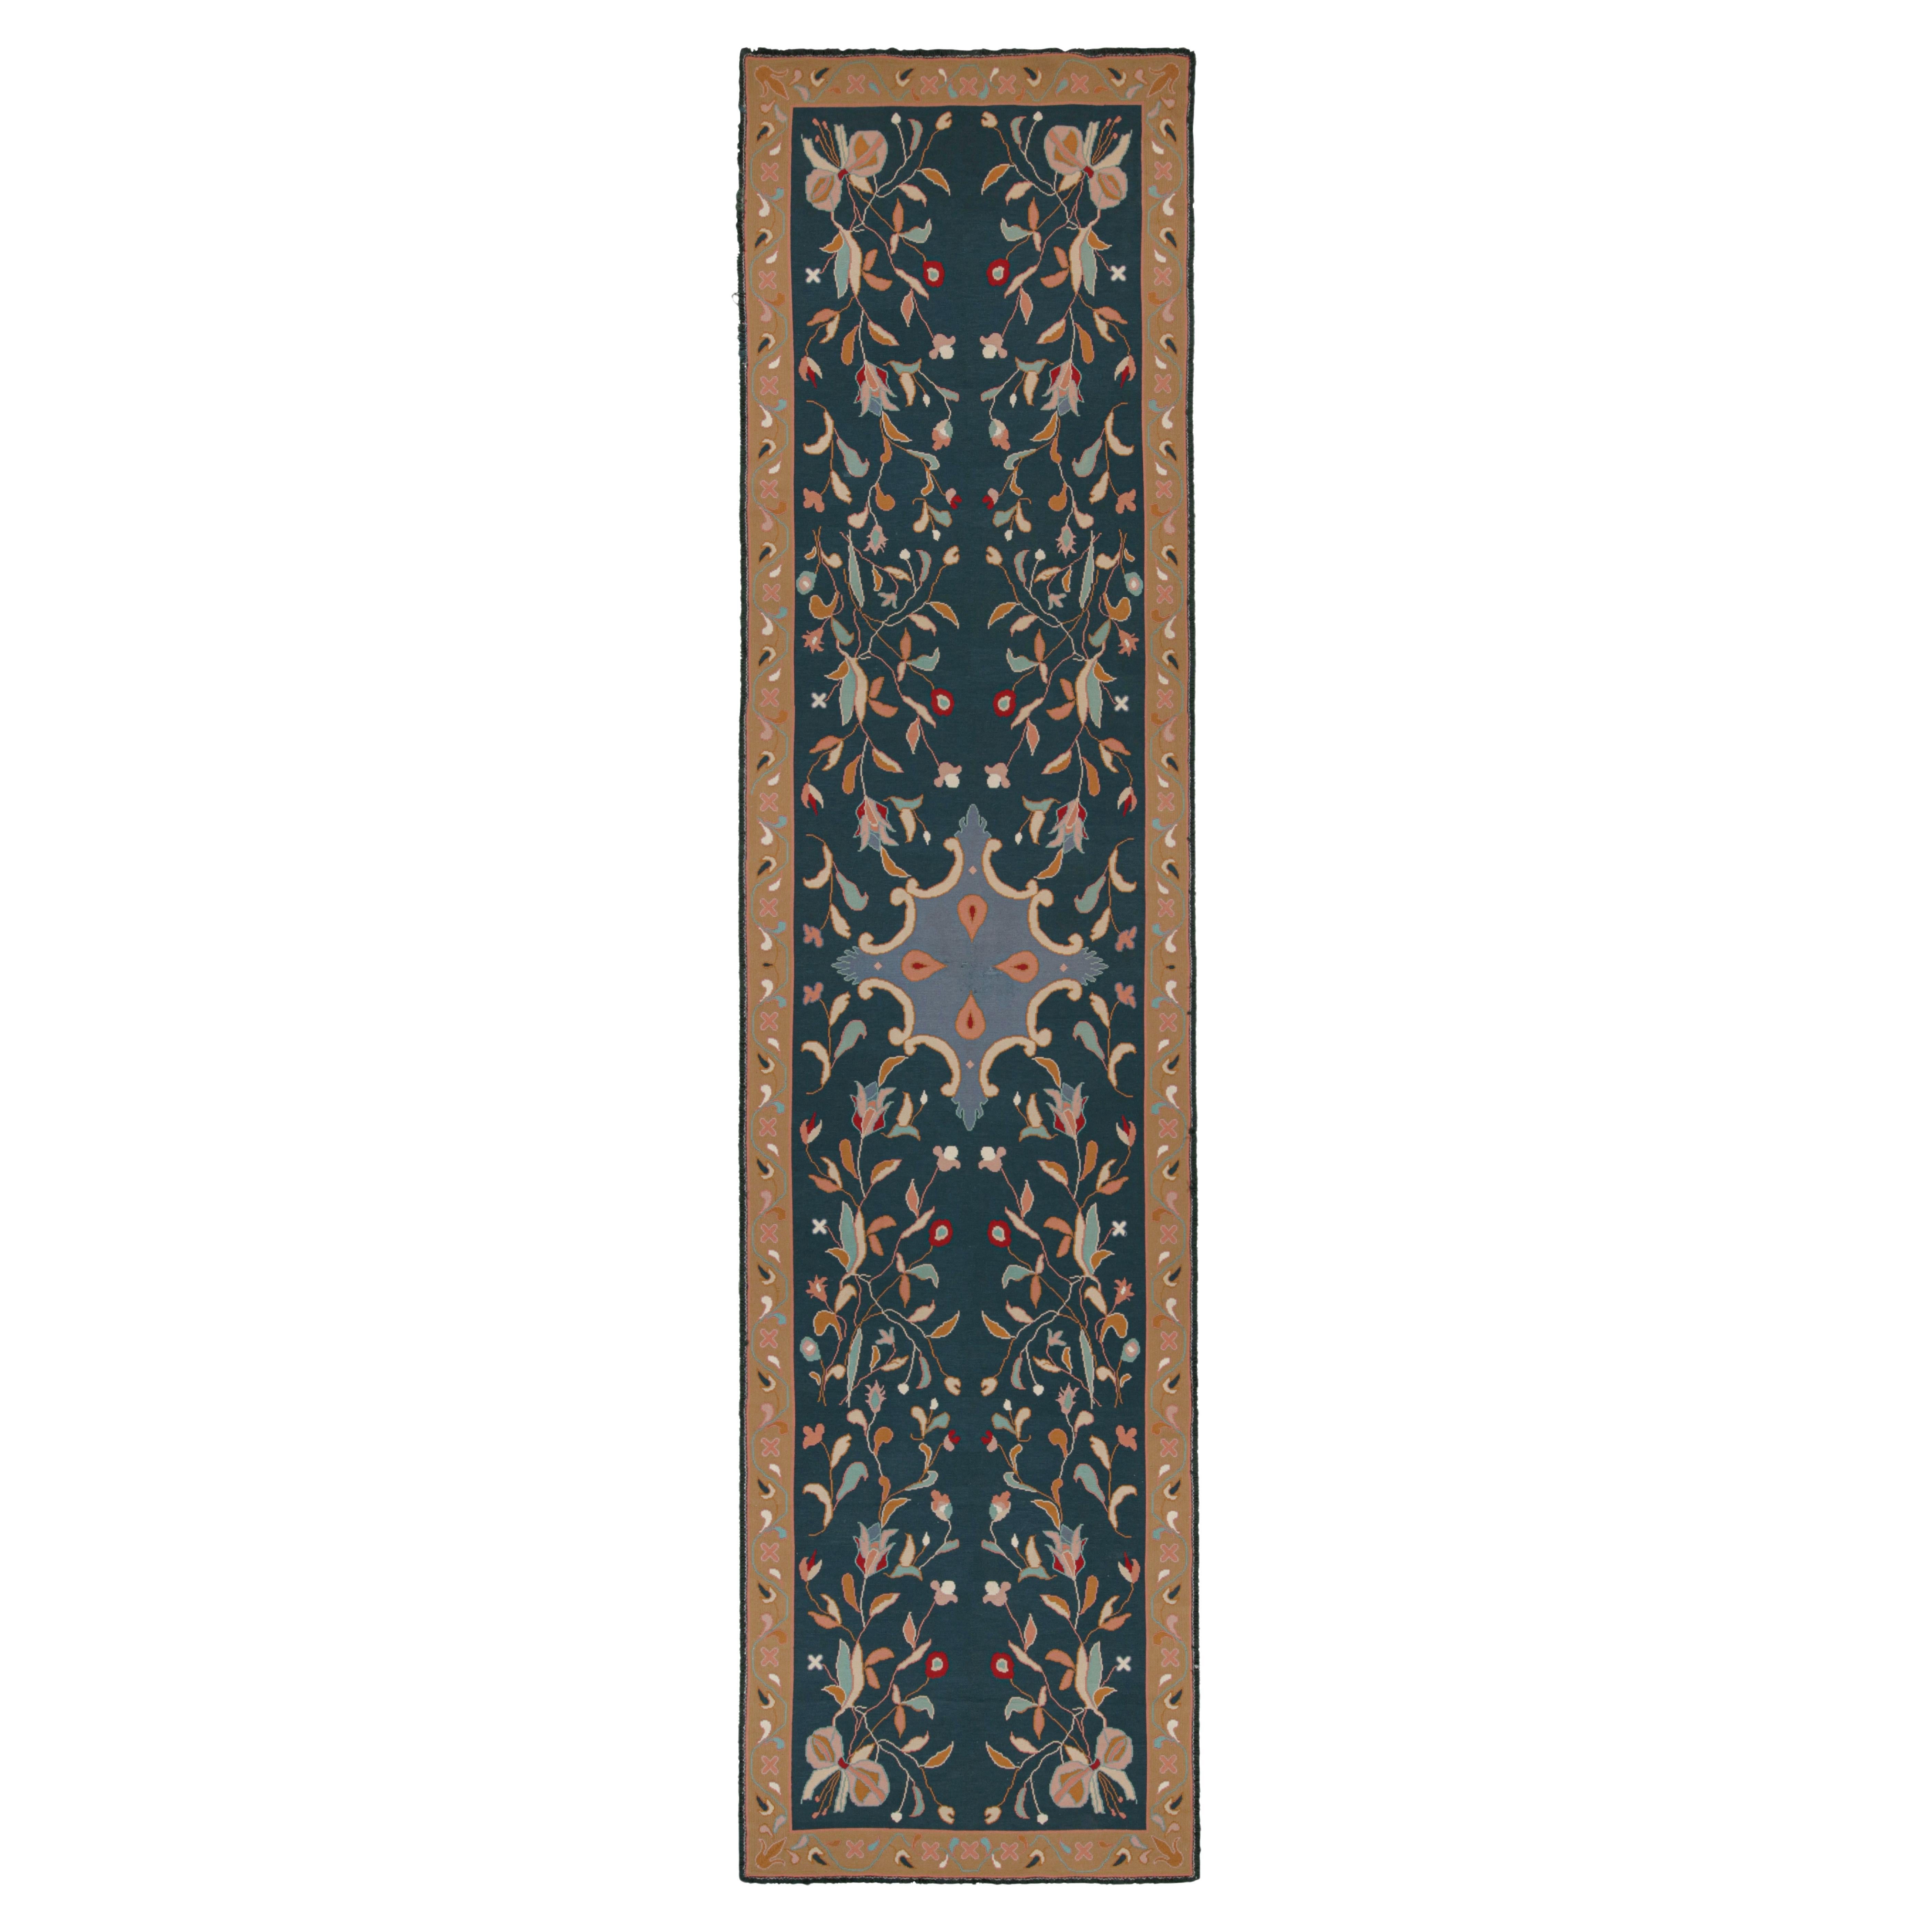 Vintage Arraiolos Runner Rug in Blue With Floral Patterns, From Rug & Kilim For Sale